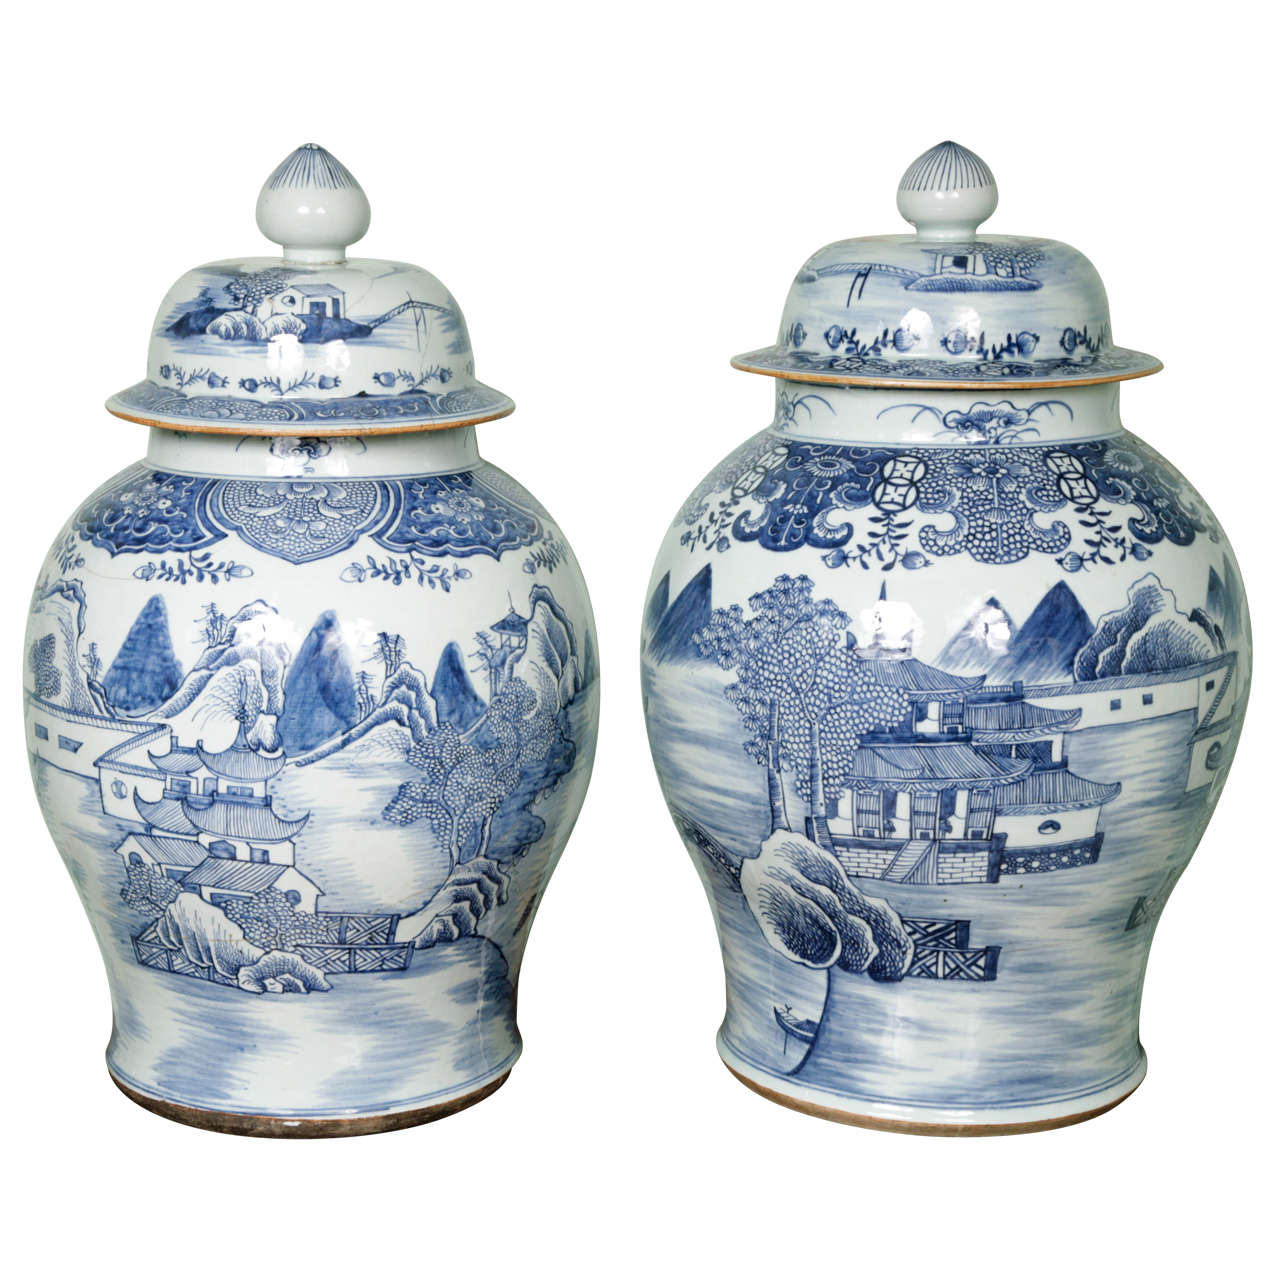 Two Huge 18th Century Chinese Blue and White Vases